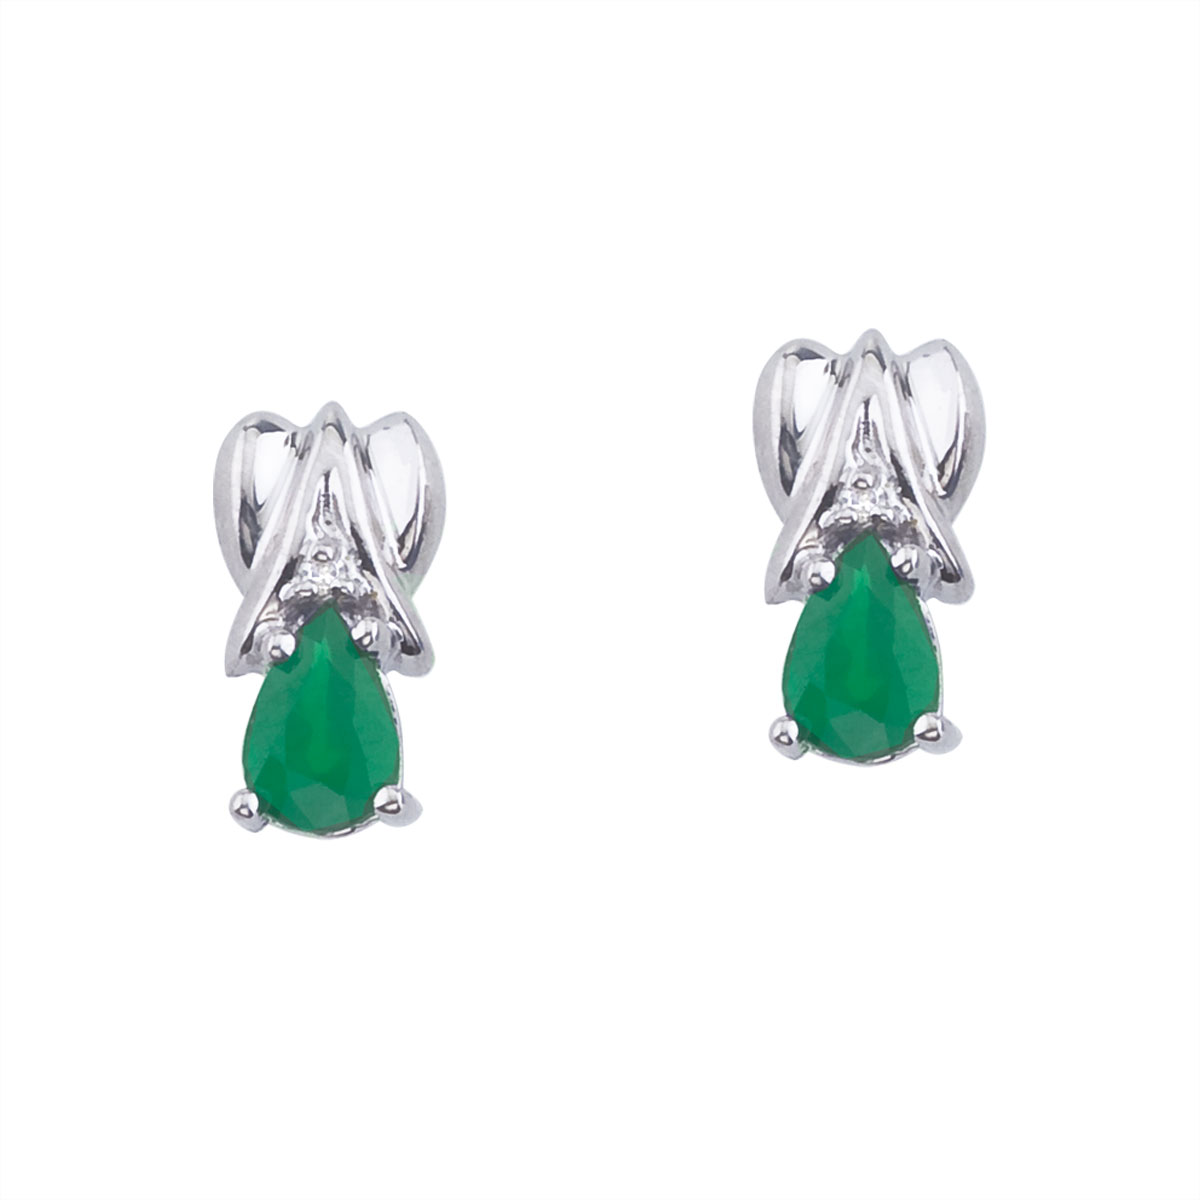 DIRECT-JEWELRY DON'T FORGET THE DASH 14k White Gold Pear-Shaped Emerald and Diamond Stud Earrings